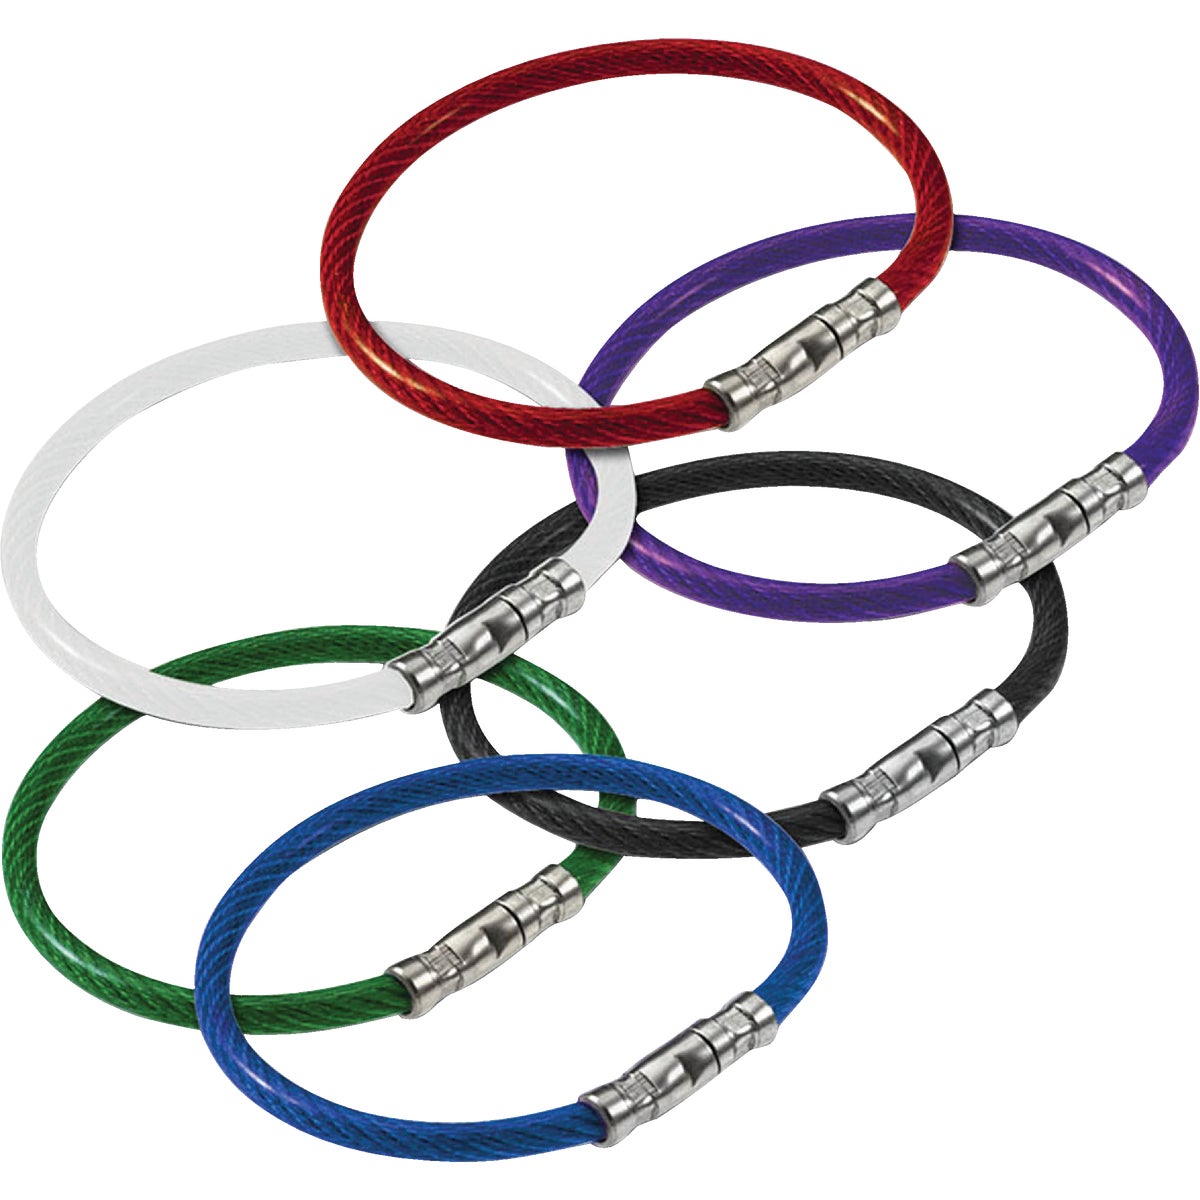 Item 573515, Twisty key ring made of strong, flexible corrosion-resistant aircraft cable